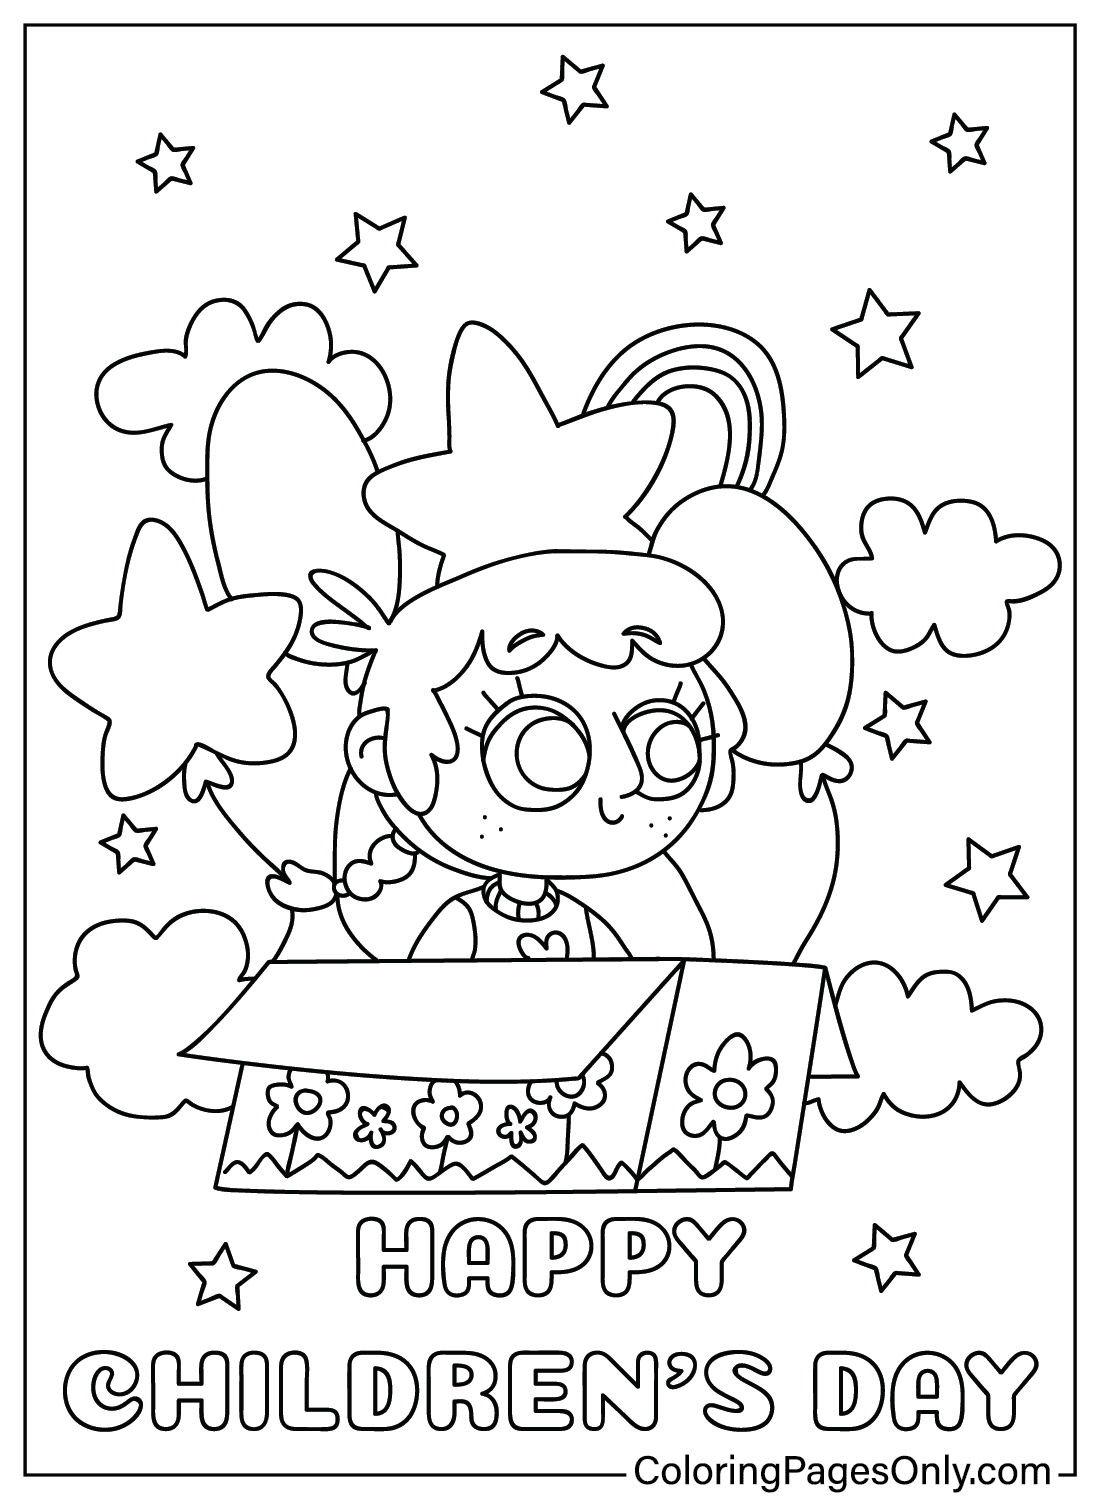 Children’s Day Coloring Sheet